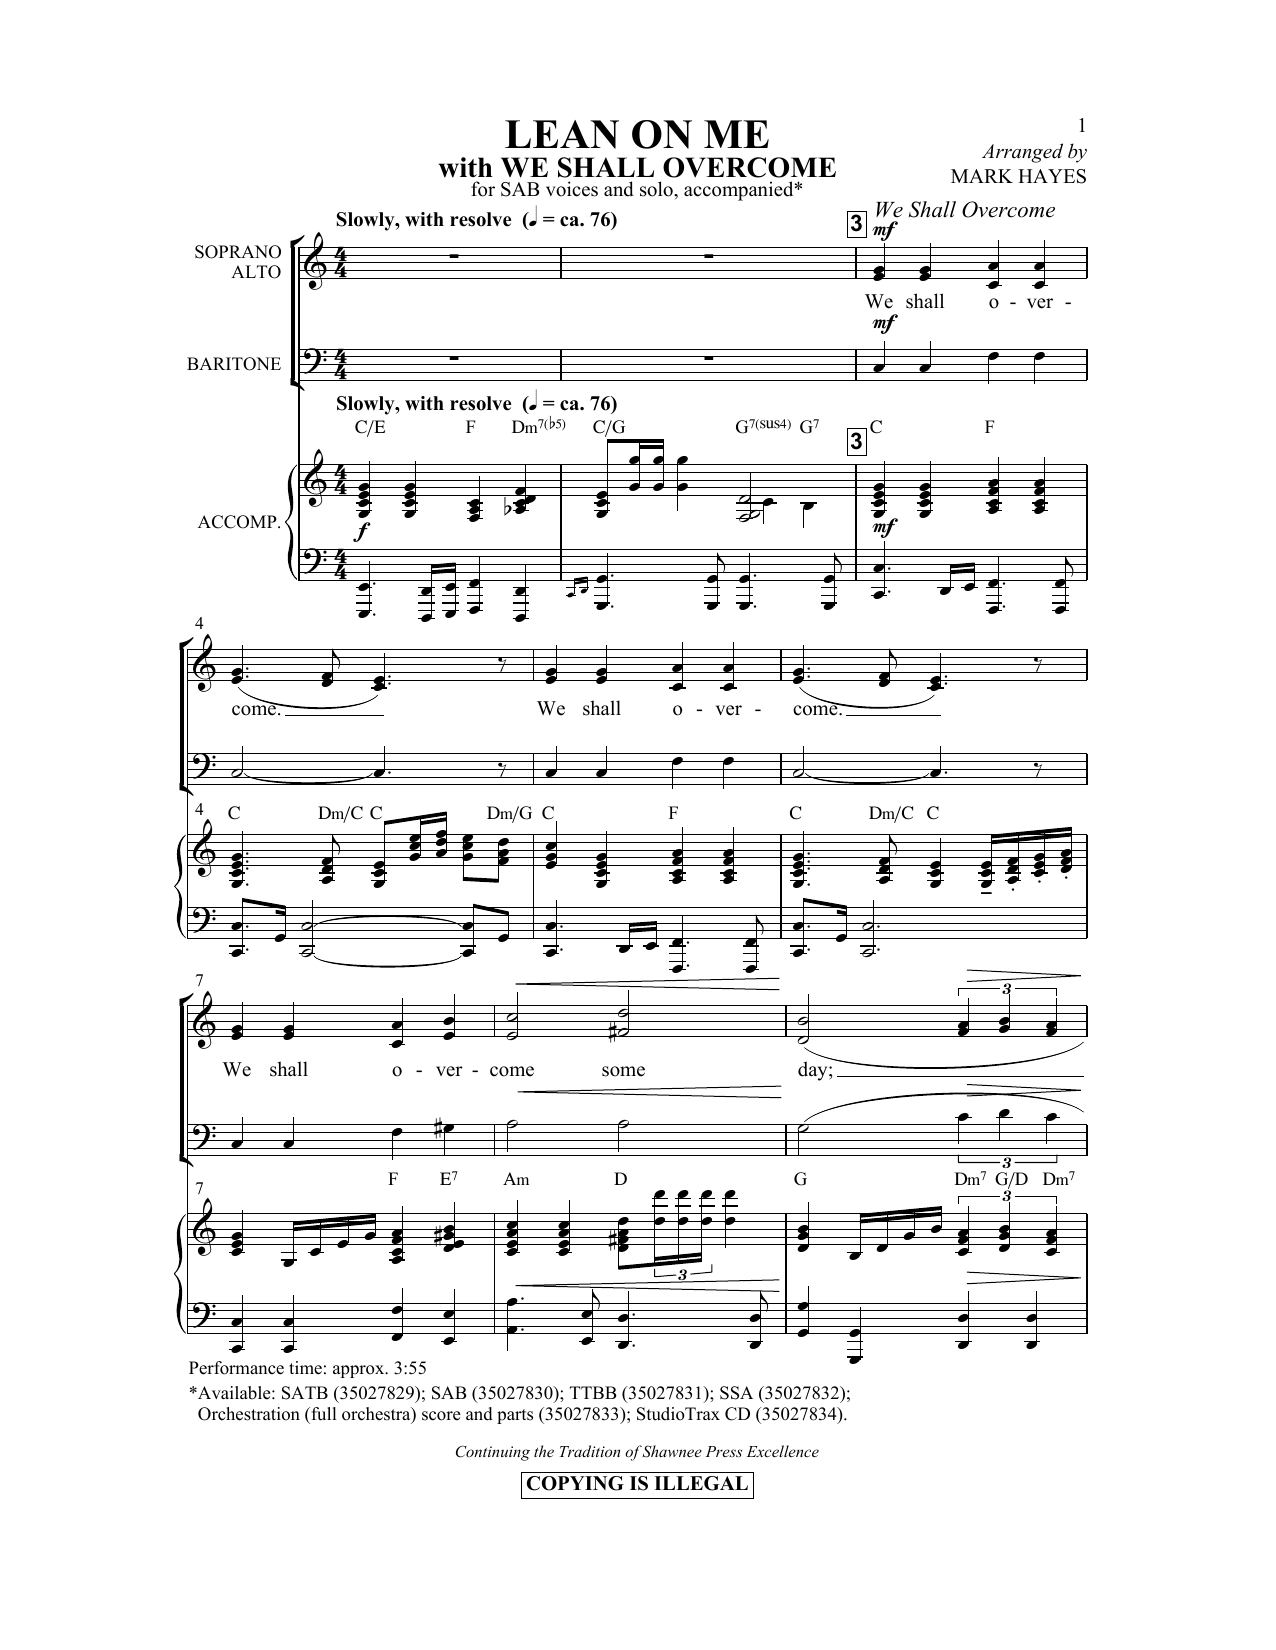 Download Mark Hayes Lean On Me (with We Shall Overcome) Sheet Music